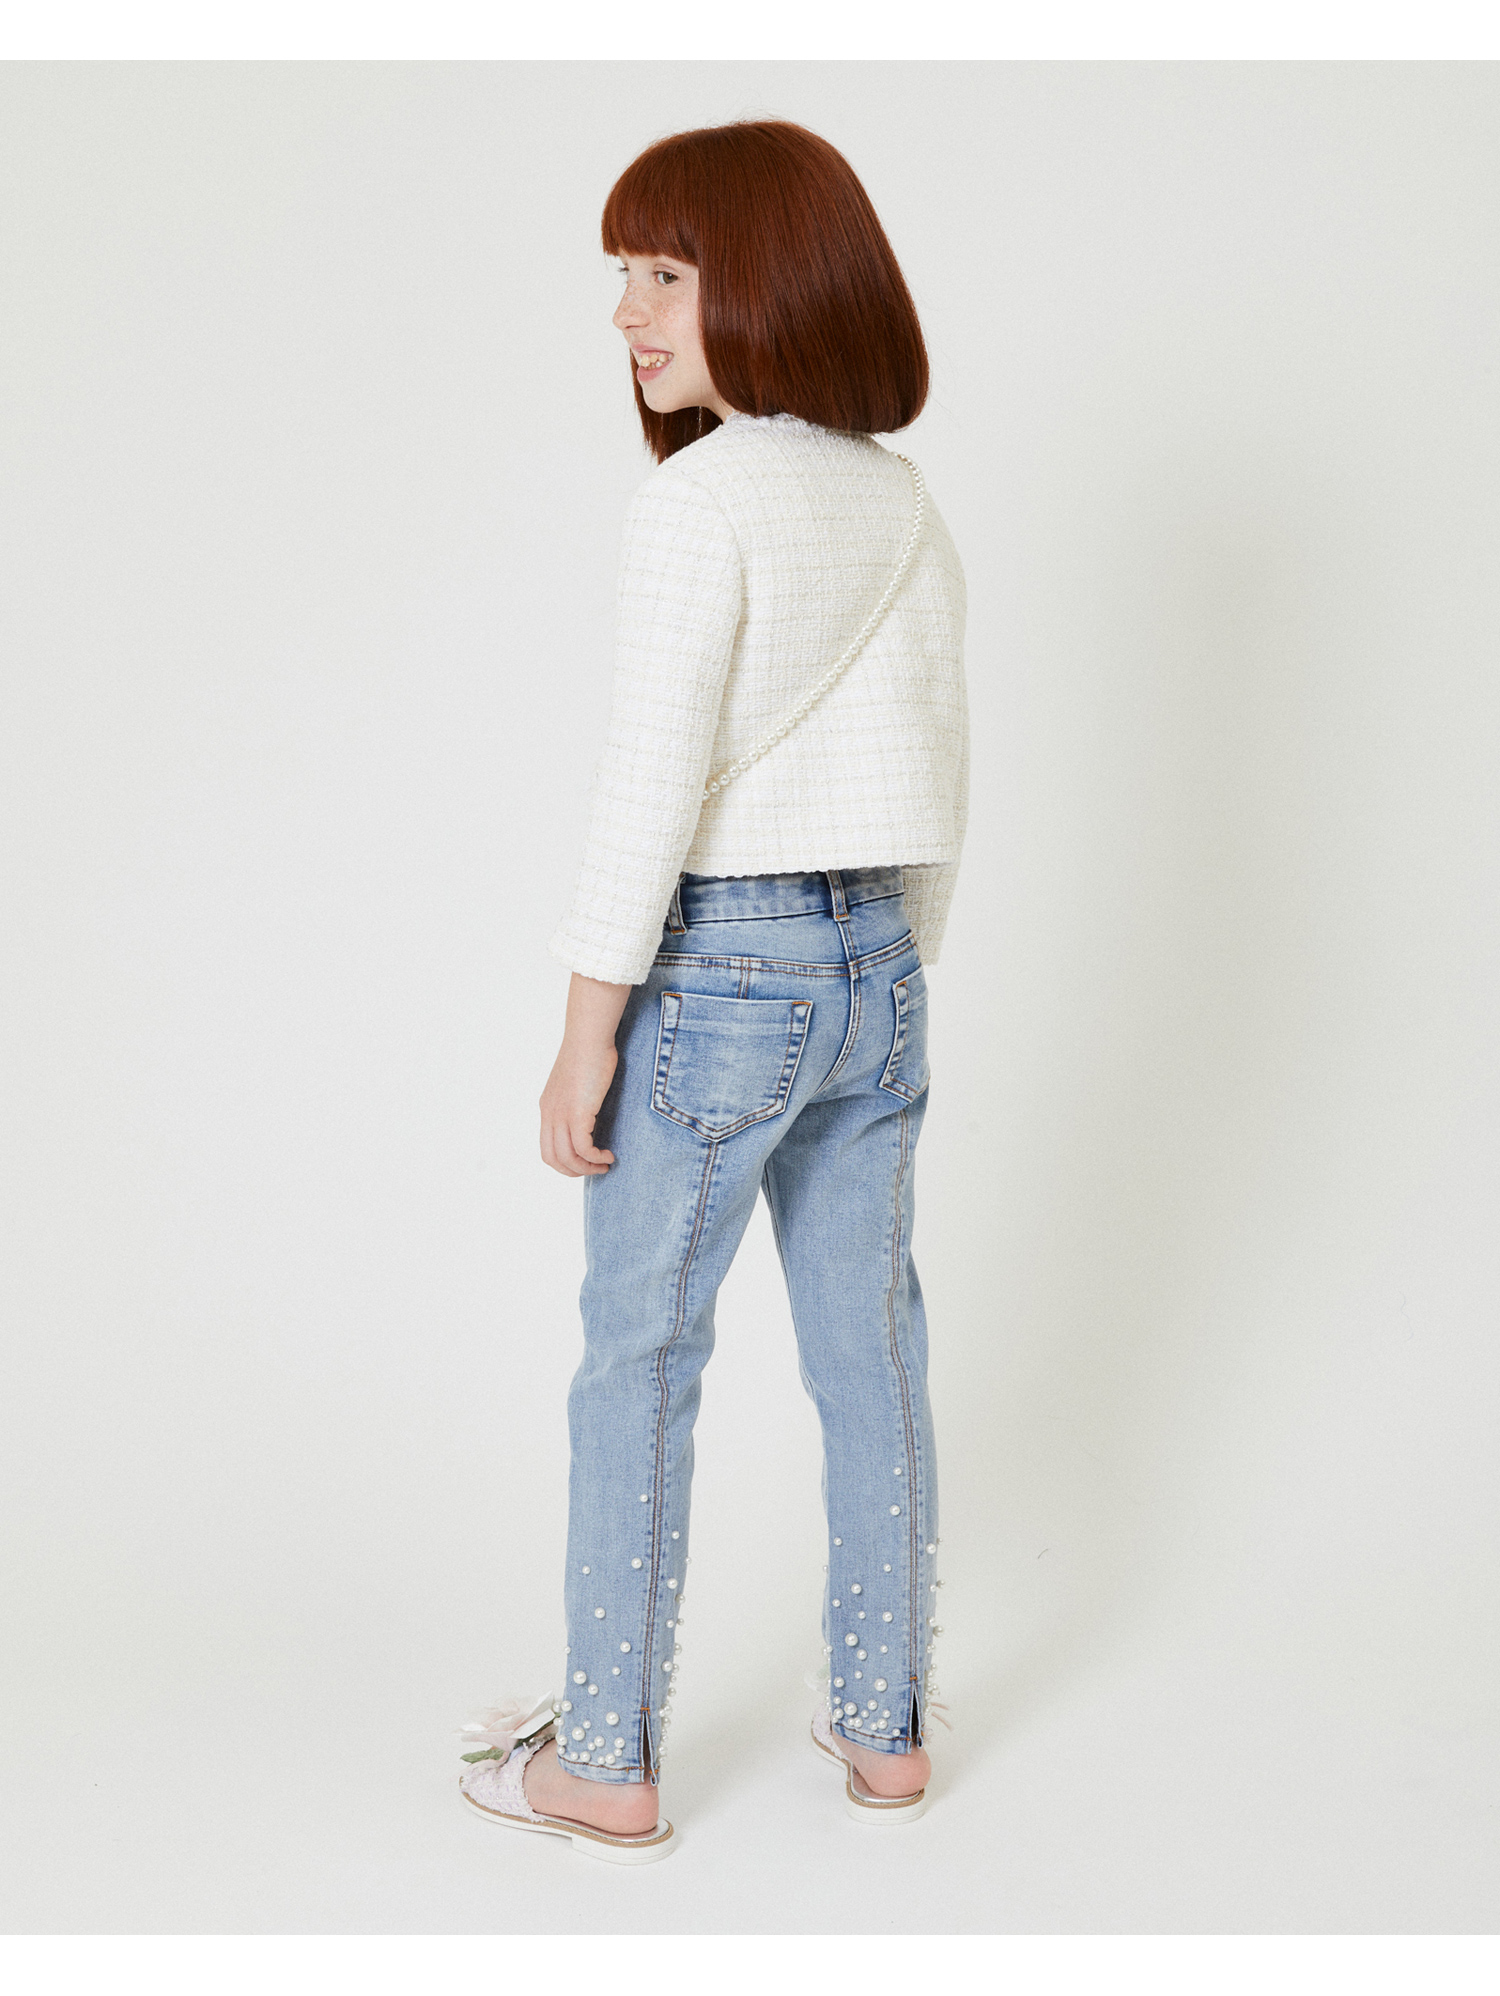 Shop Monnalisa Jeans With Dégradé Pearls In Turquoise